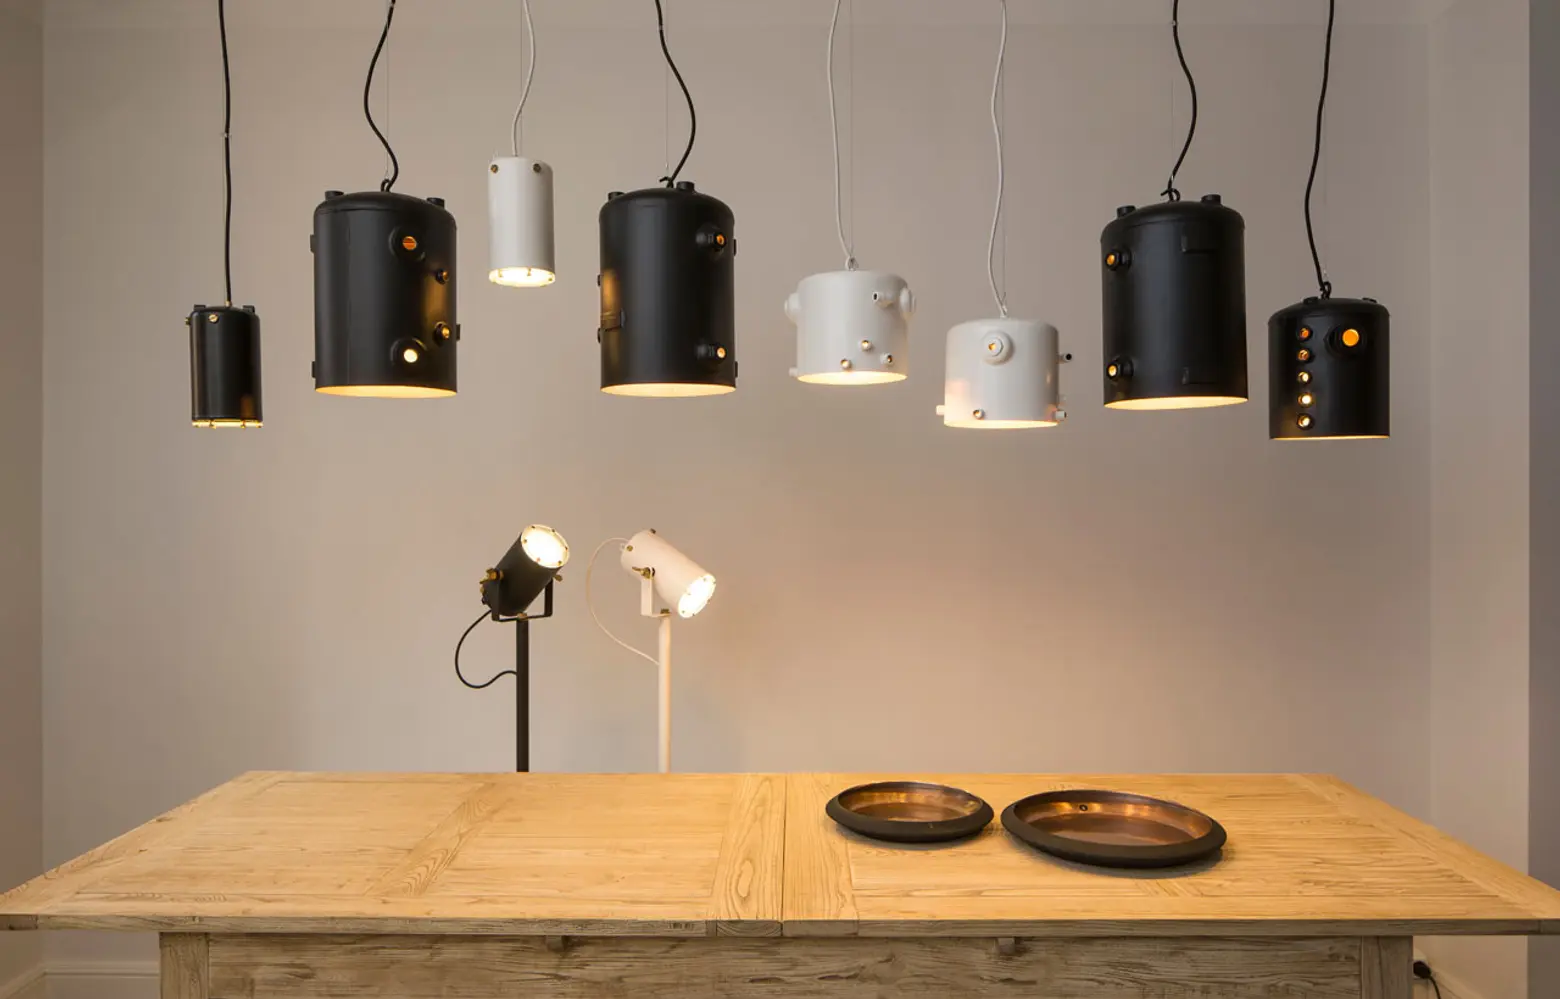 These Lamps Are Made From Old Espresso Machine Boilers